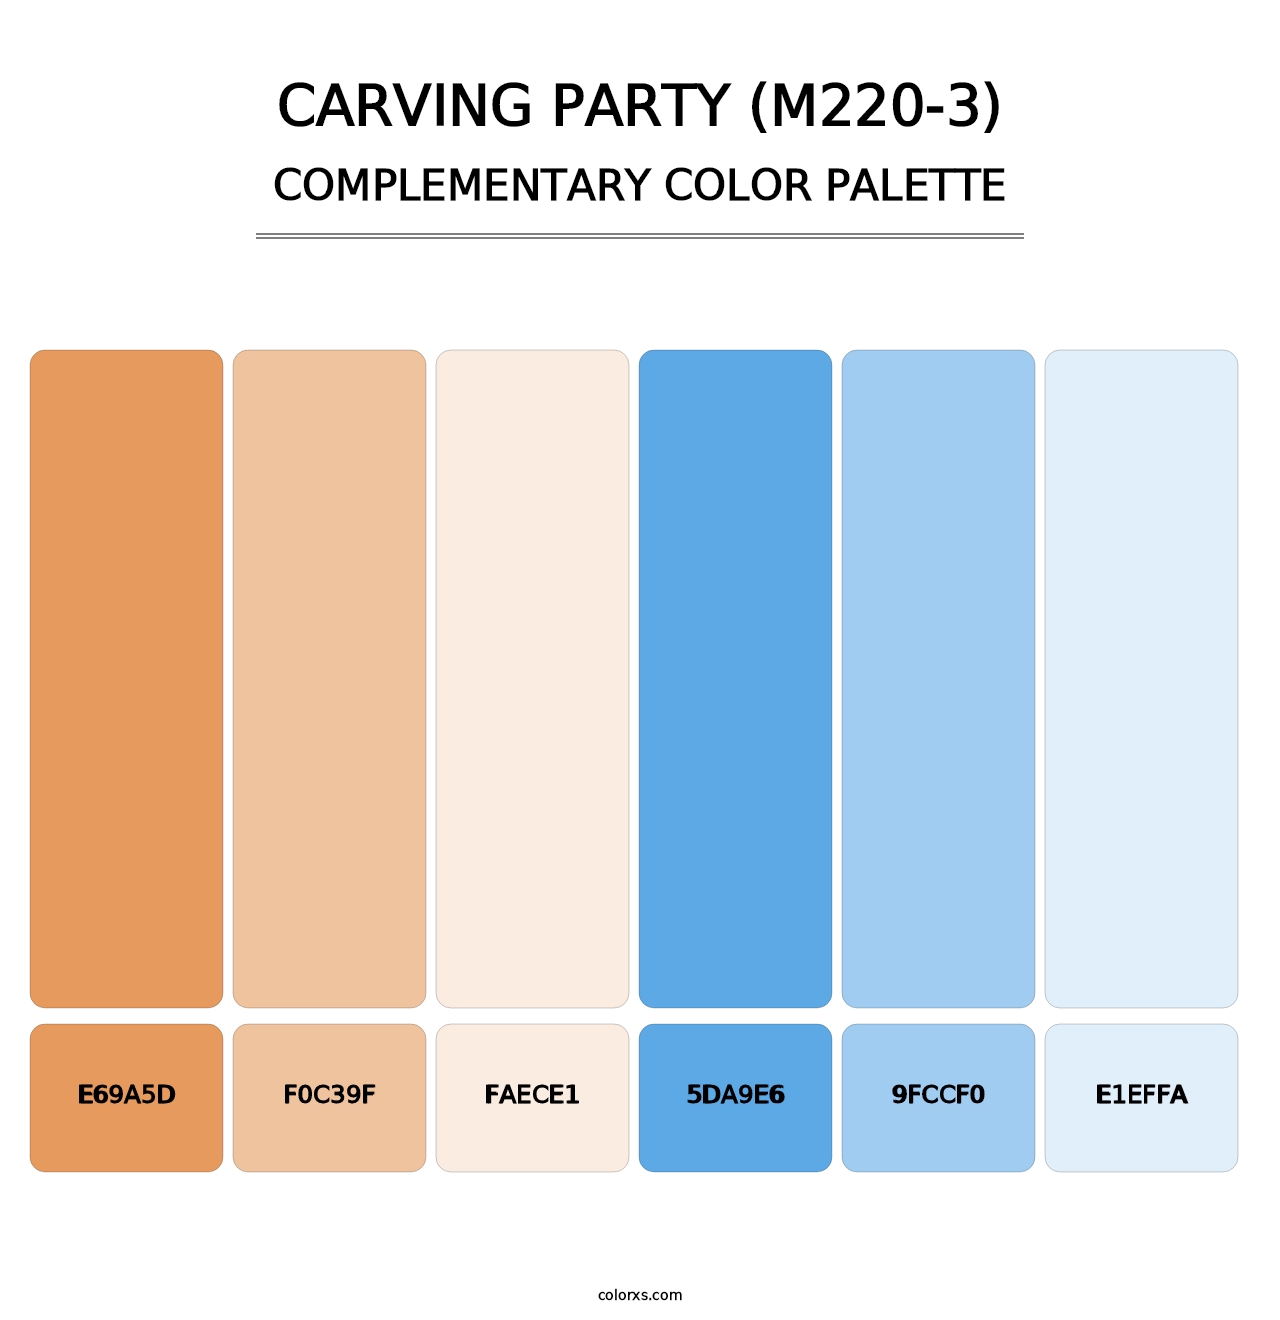 Carving Party (M220-3) - Complementary Color Palette